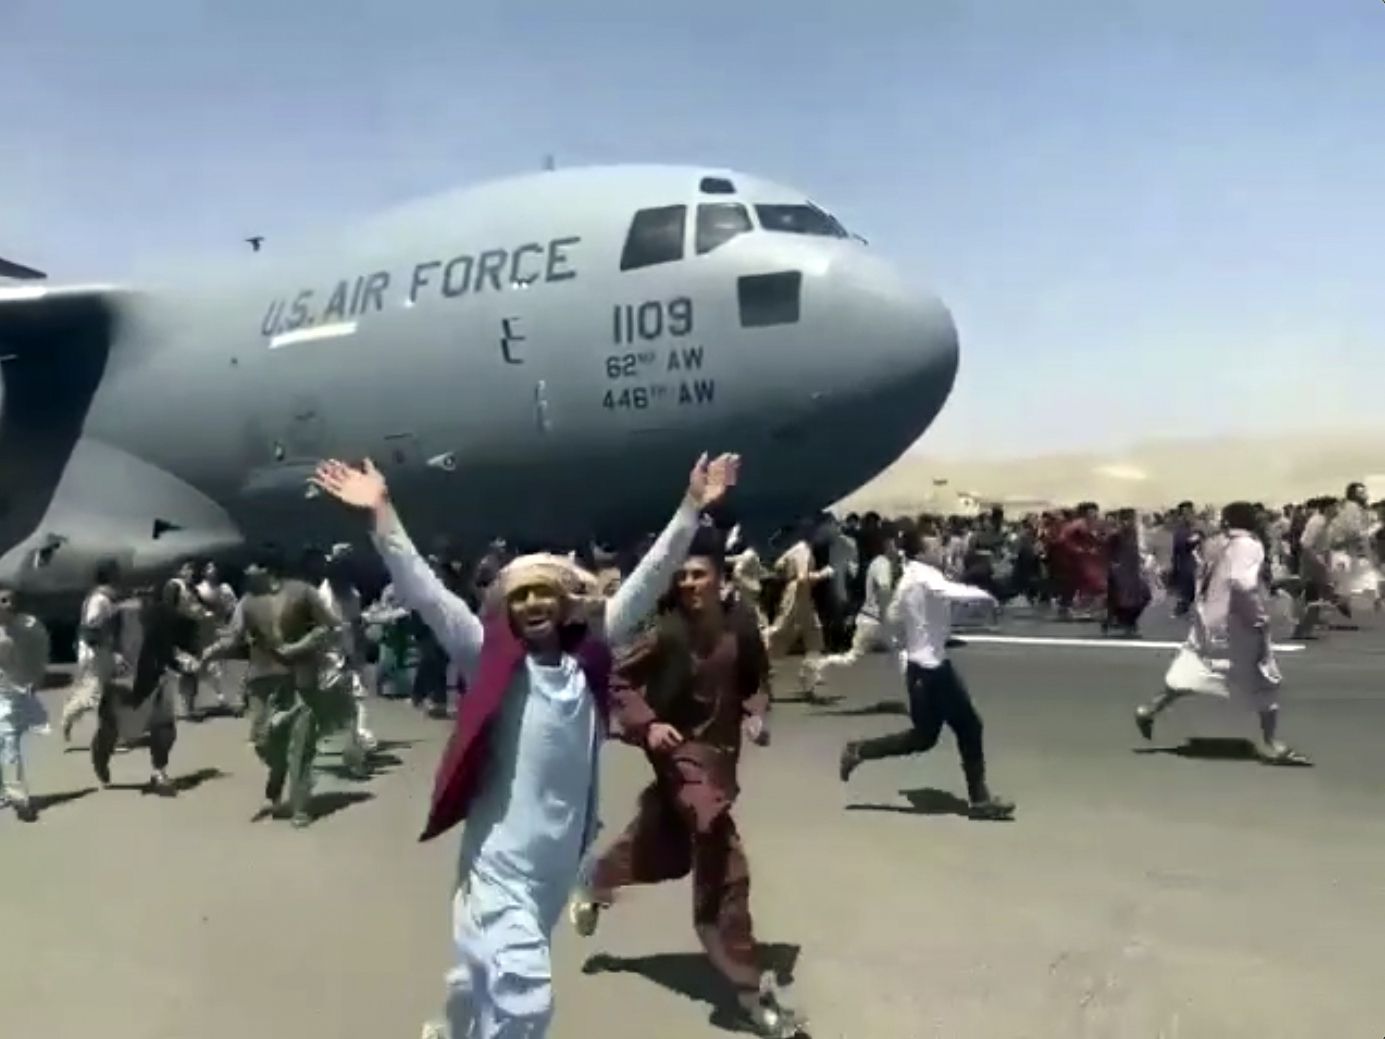 Hundreds of people run alongside a U.S. Air Force C-17 transport plane as it moves down a runway of the international airport, in Kabul, Afghanistan, Monday, Aug.16. 2021. Thousands of Afghans have rushed onto the tarmac at the airport, some so desperate to escape the Taliban capture of their country that they held onto the American military jet as it took off and plunged to death. (Verified UGC via AP)